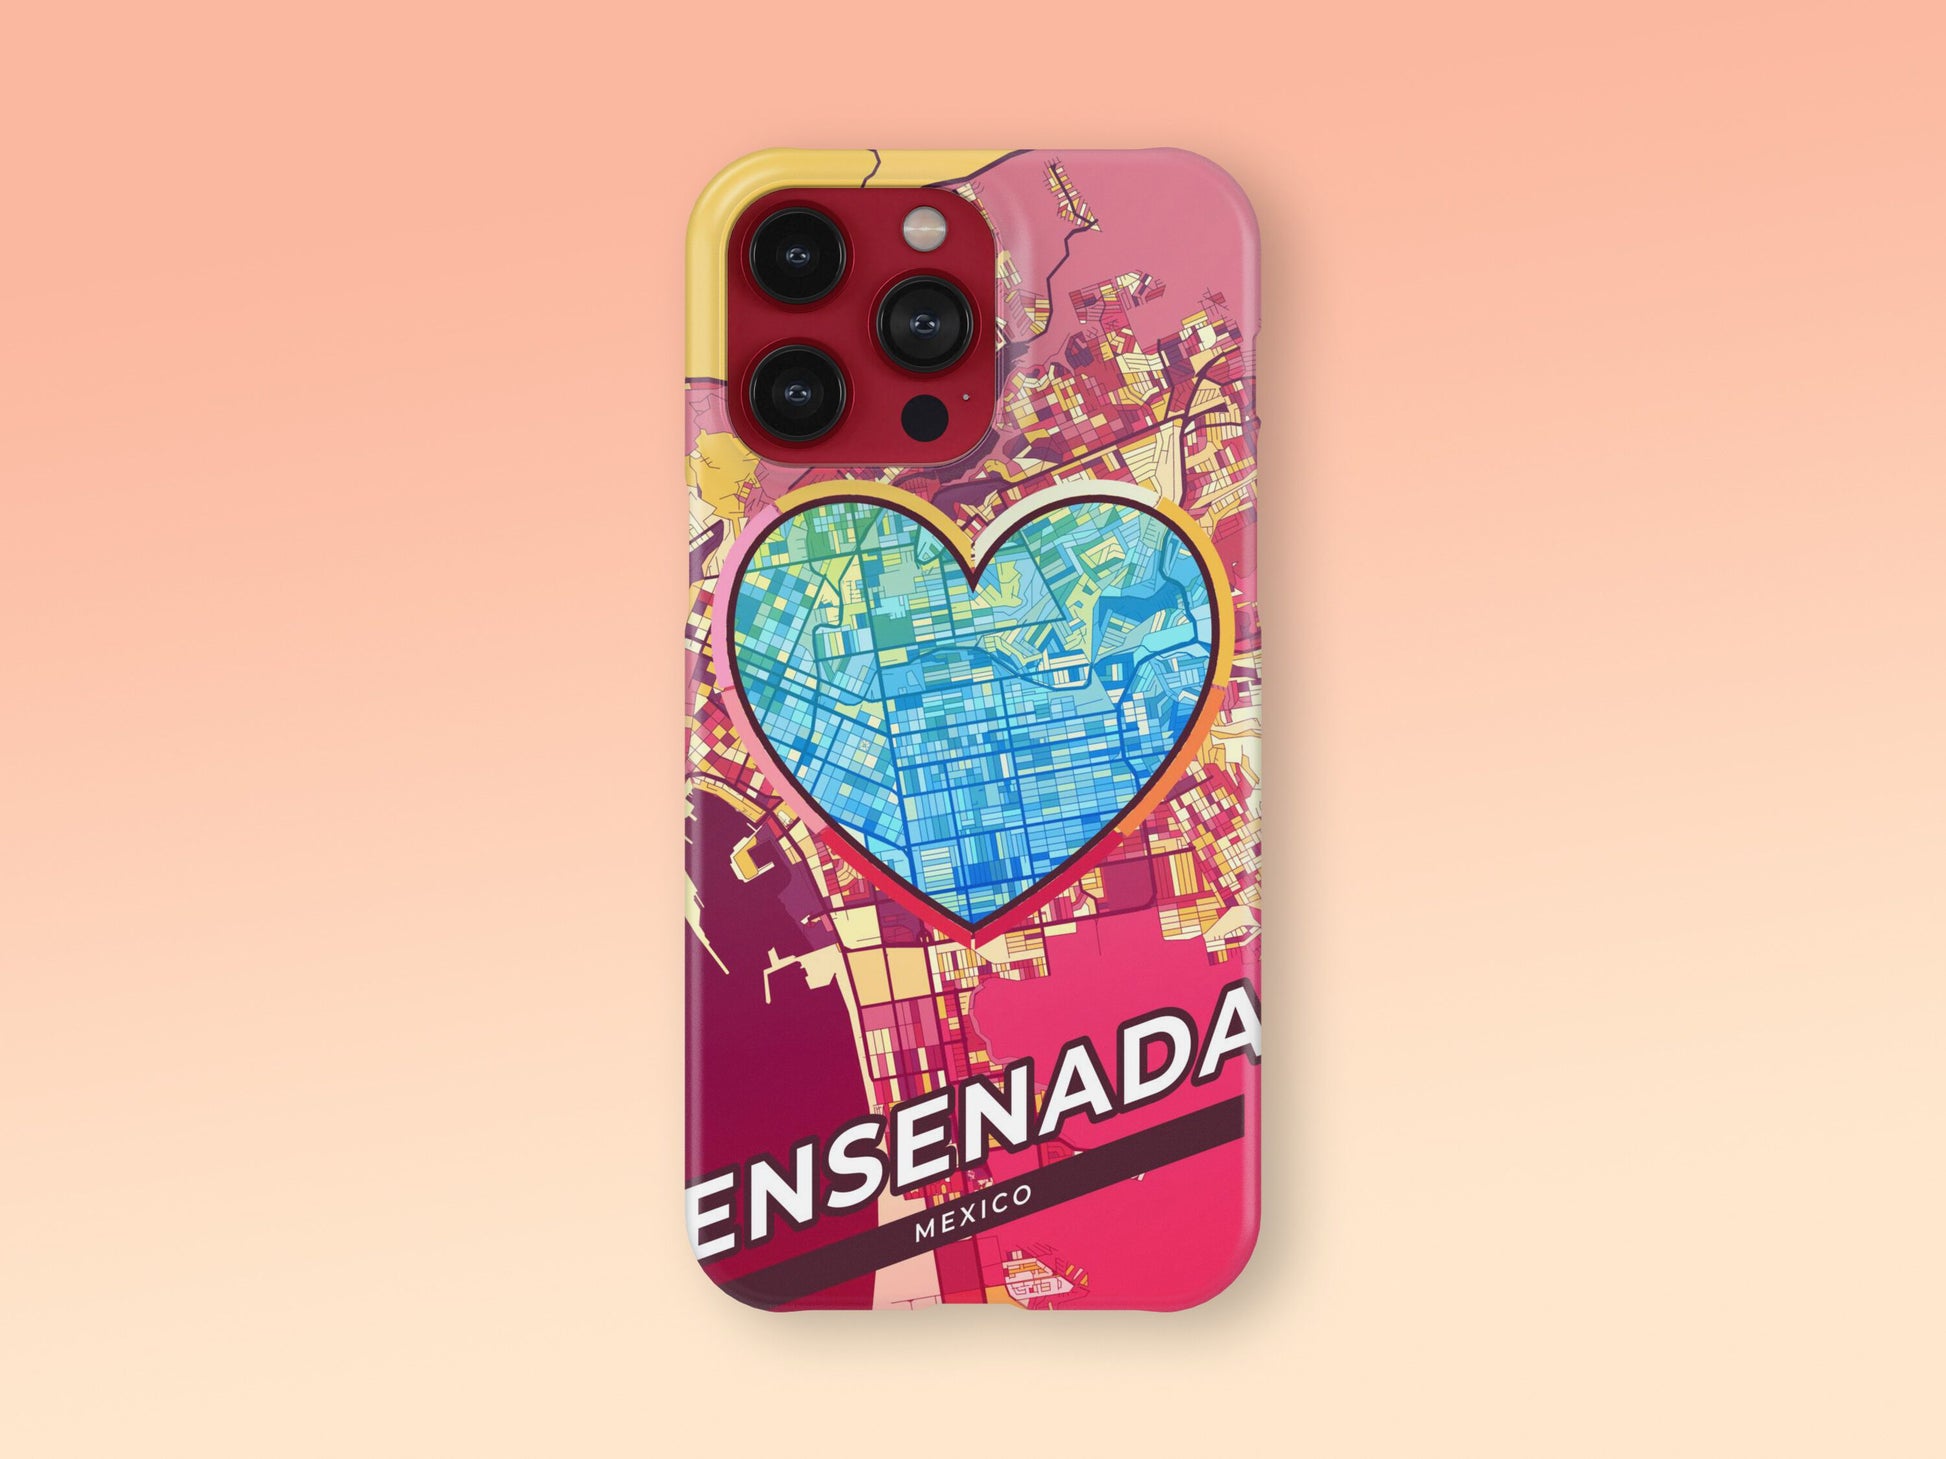 Ensenada Mexico slim phone case with colorful icon. Birthday, wedding or housewarming gift. Couple match cases. 2